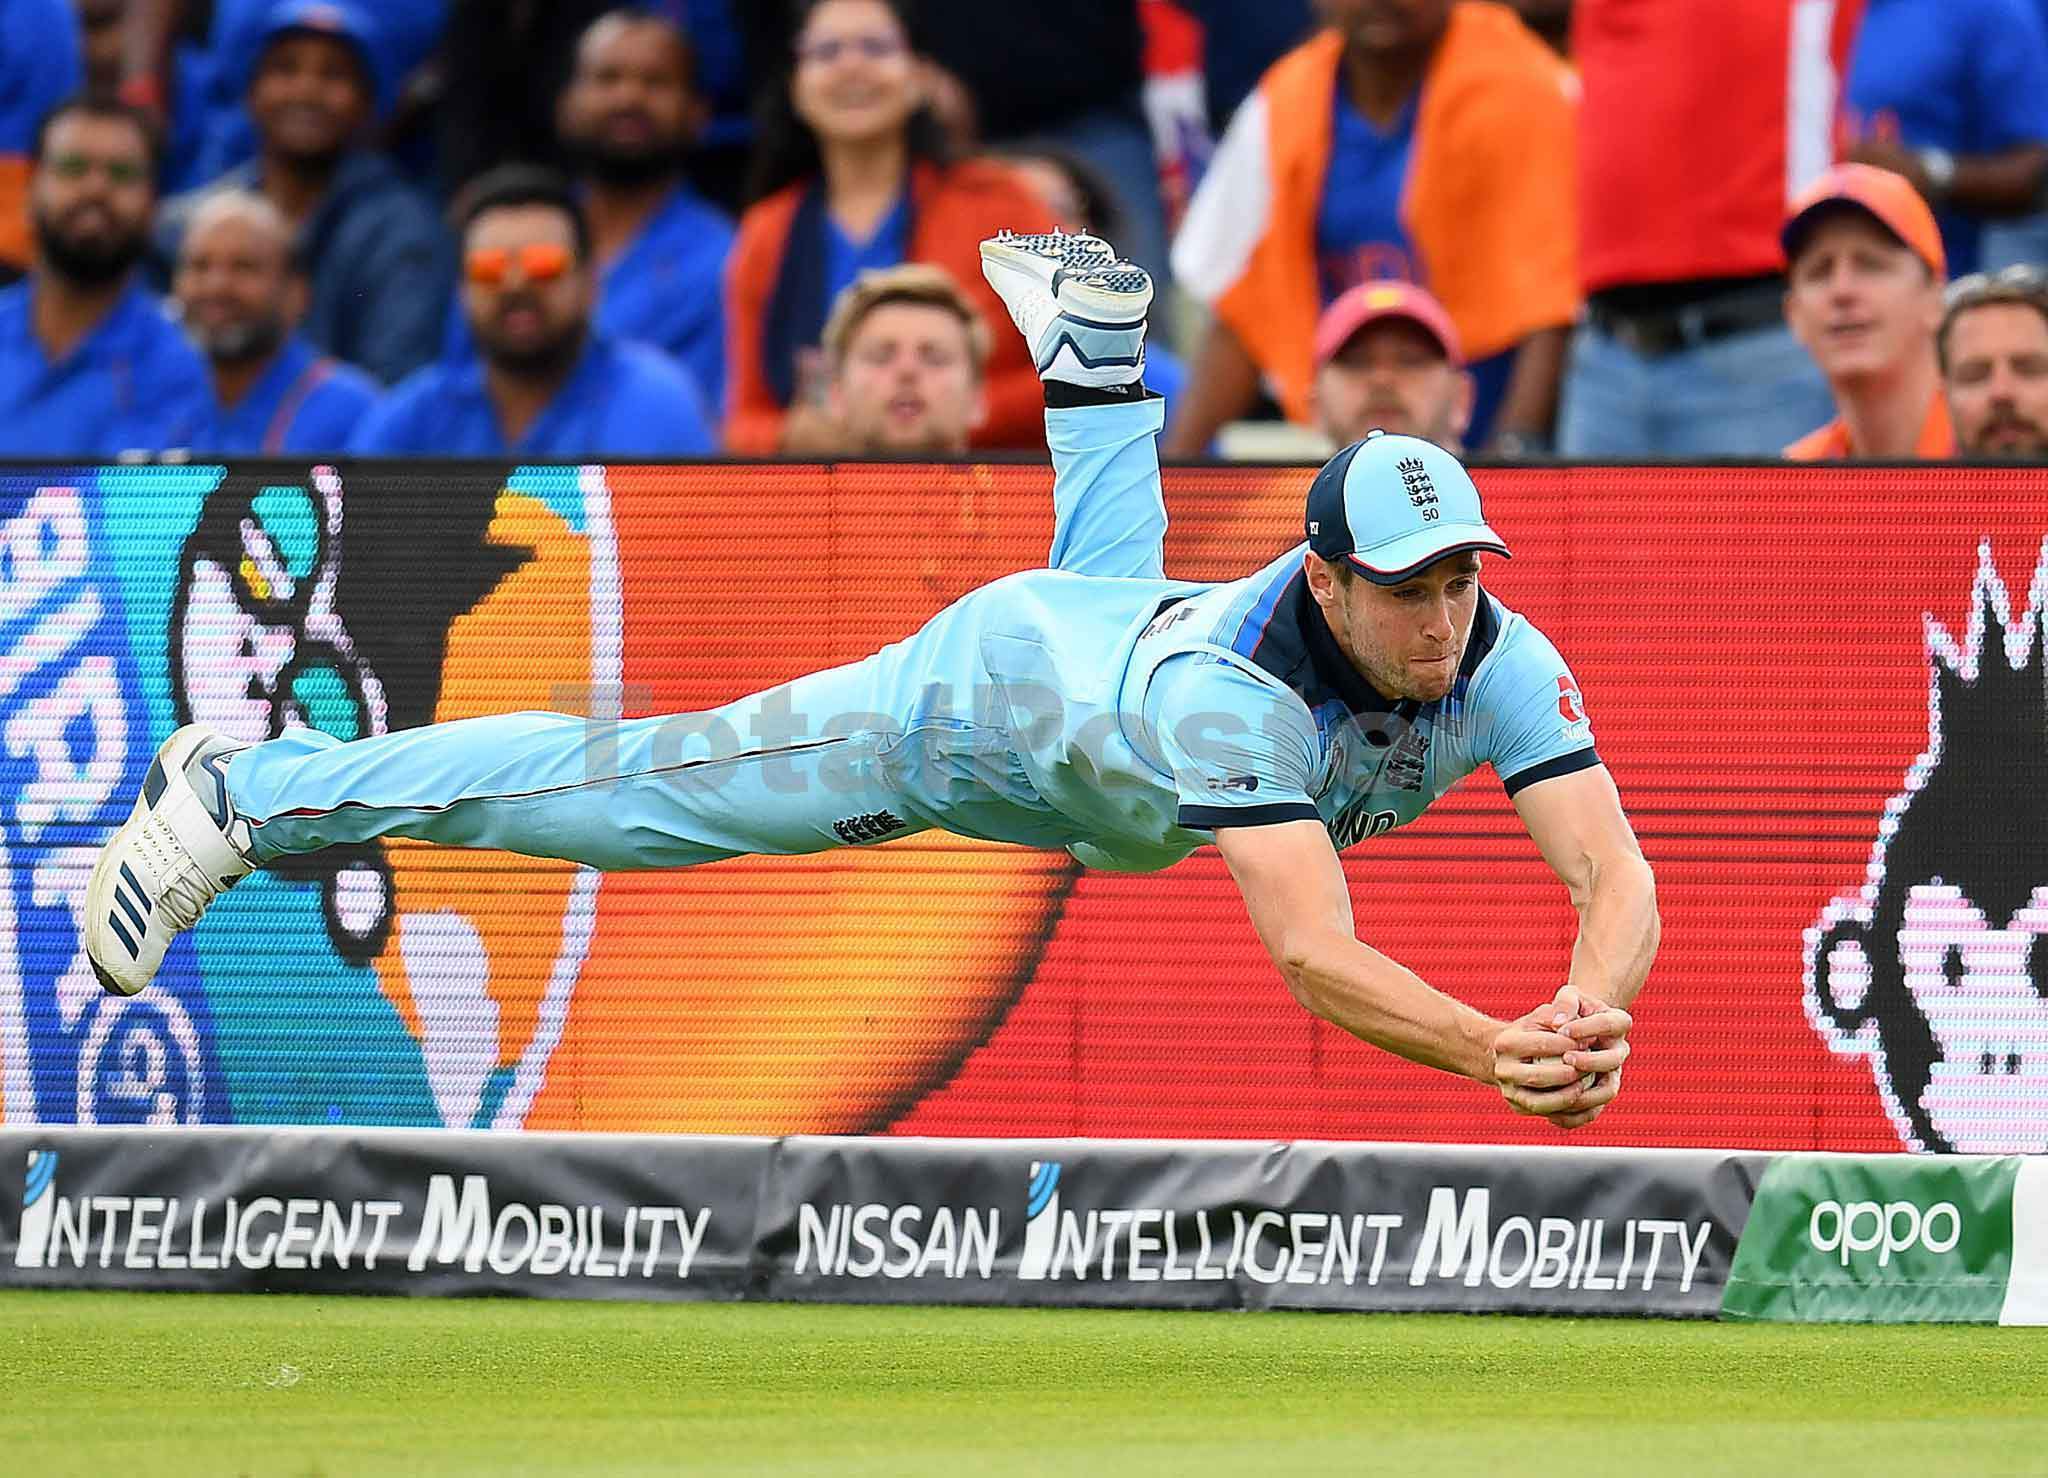 Super England Beat India To Keep Cricket World Cup Hopes Alive